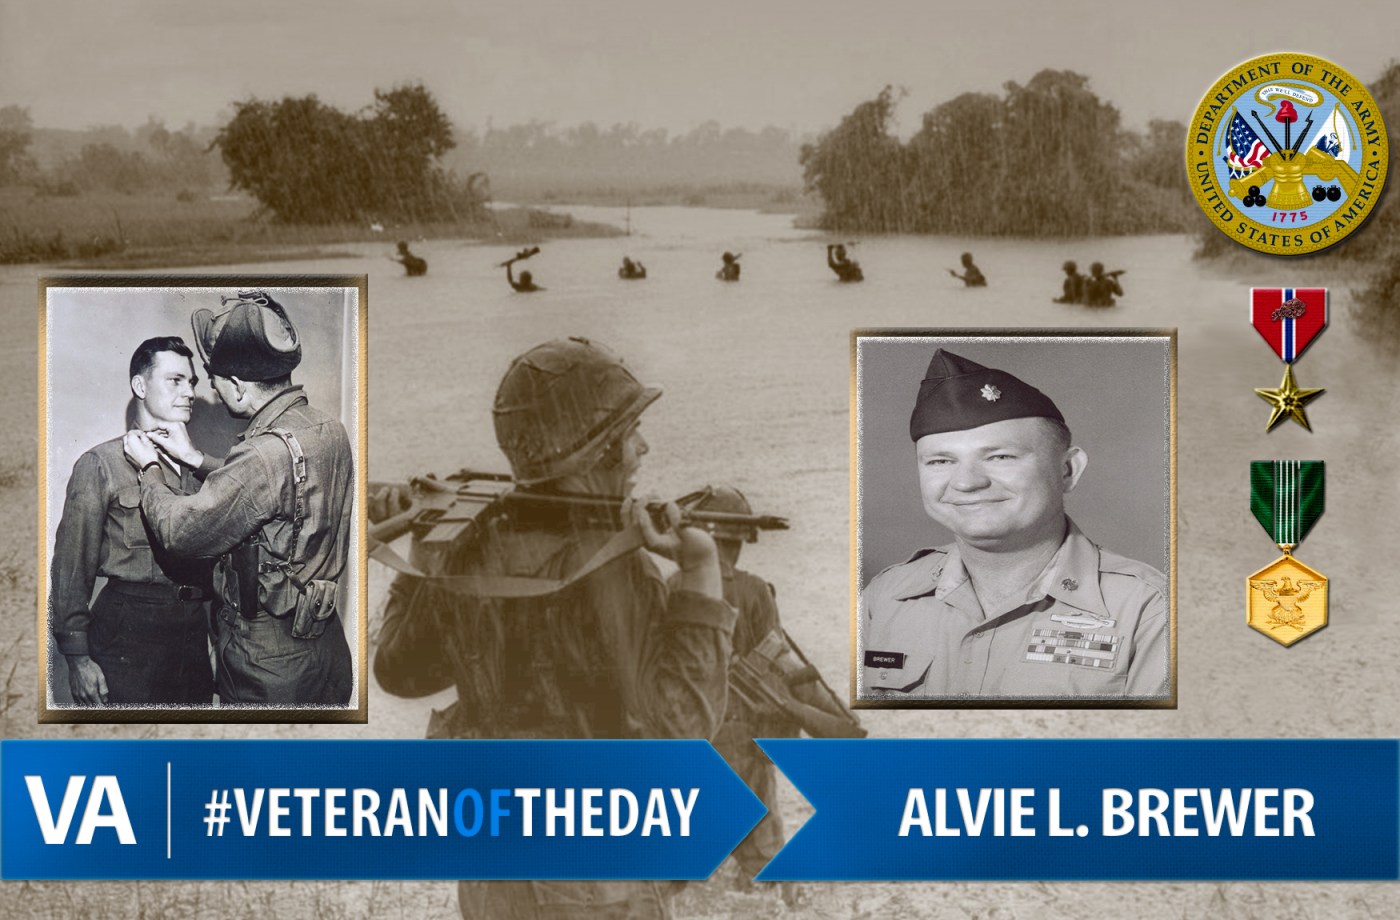 Alvie L. Brewer - Veteran of the Day